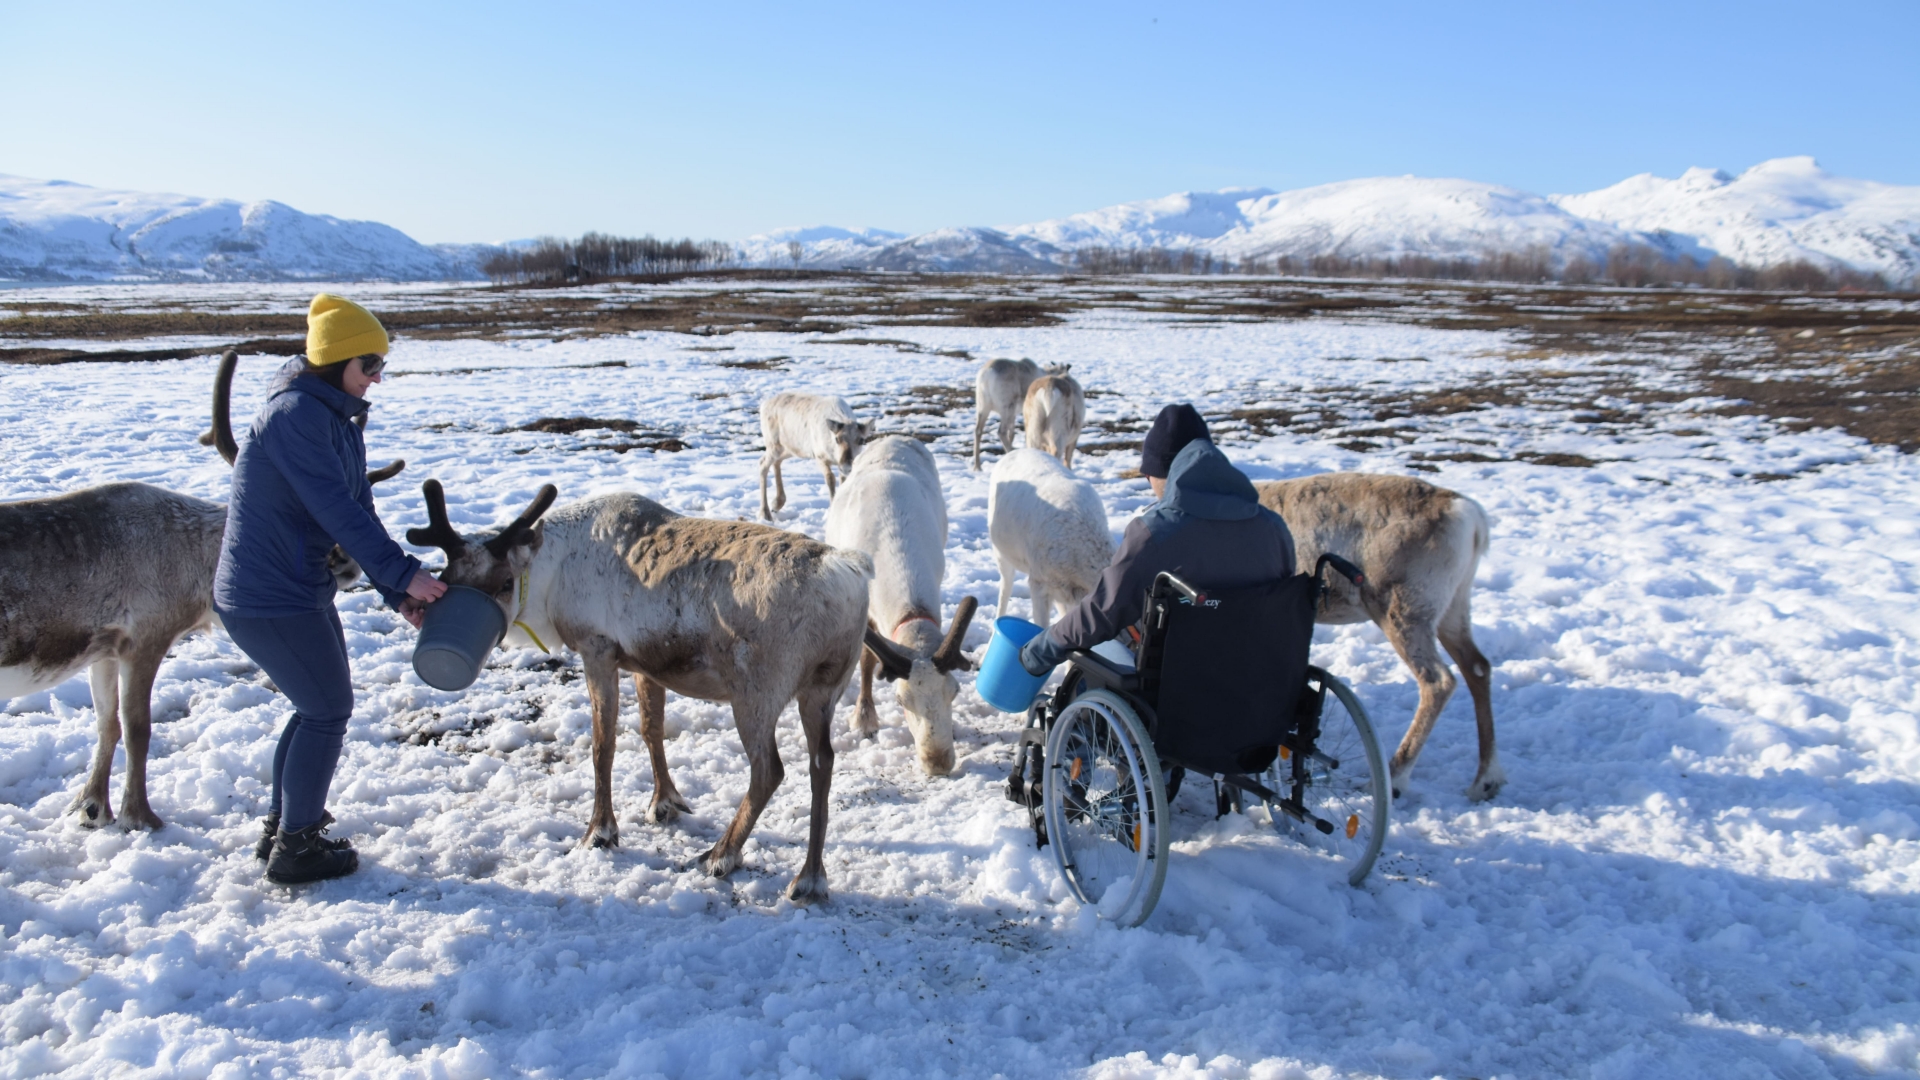 Person in a wheelchair feeding reindeer with another person also in the picture